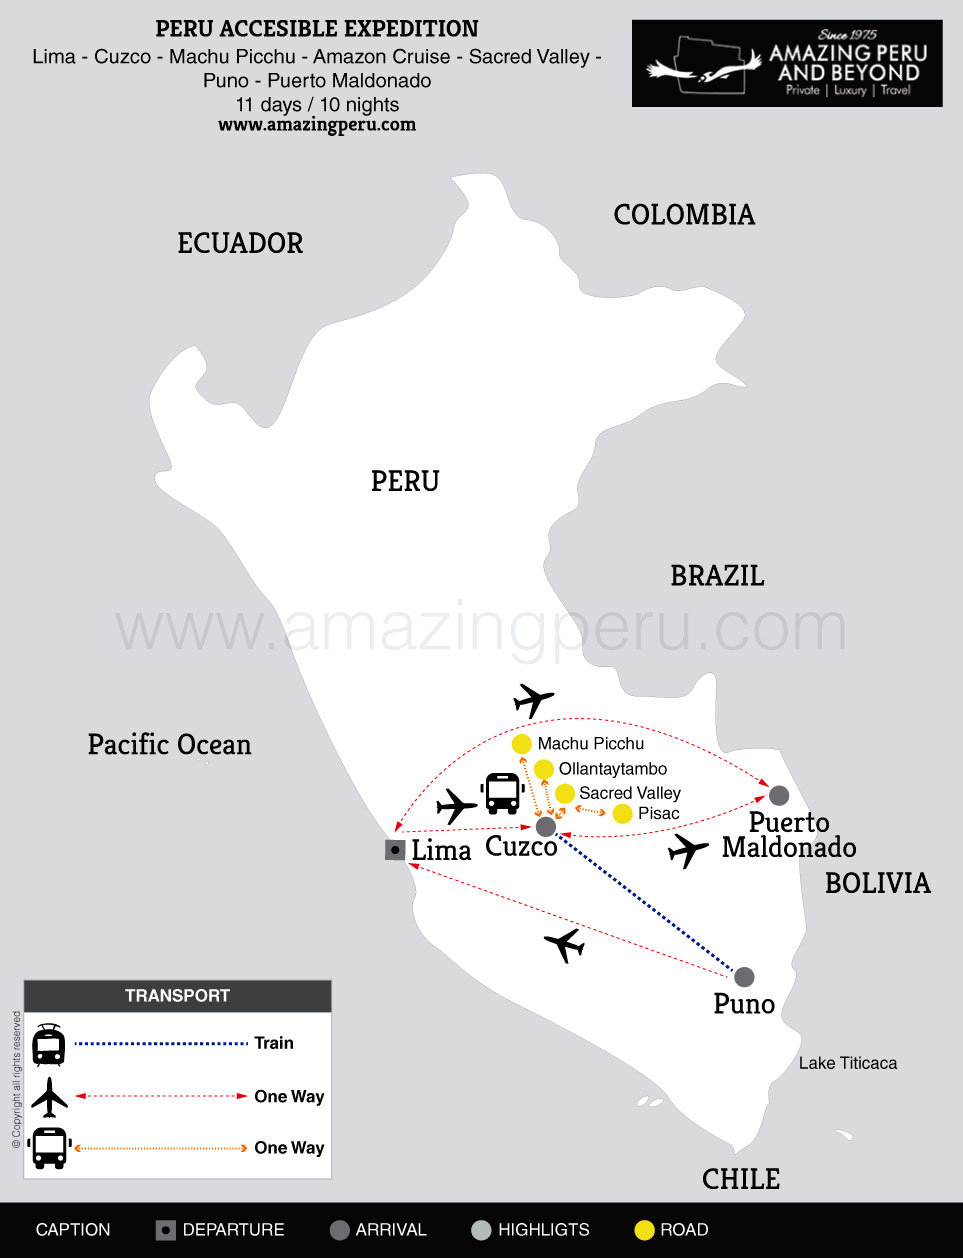 2023 Peru Accesible Expedition - 11 days / 10 nights.